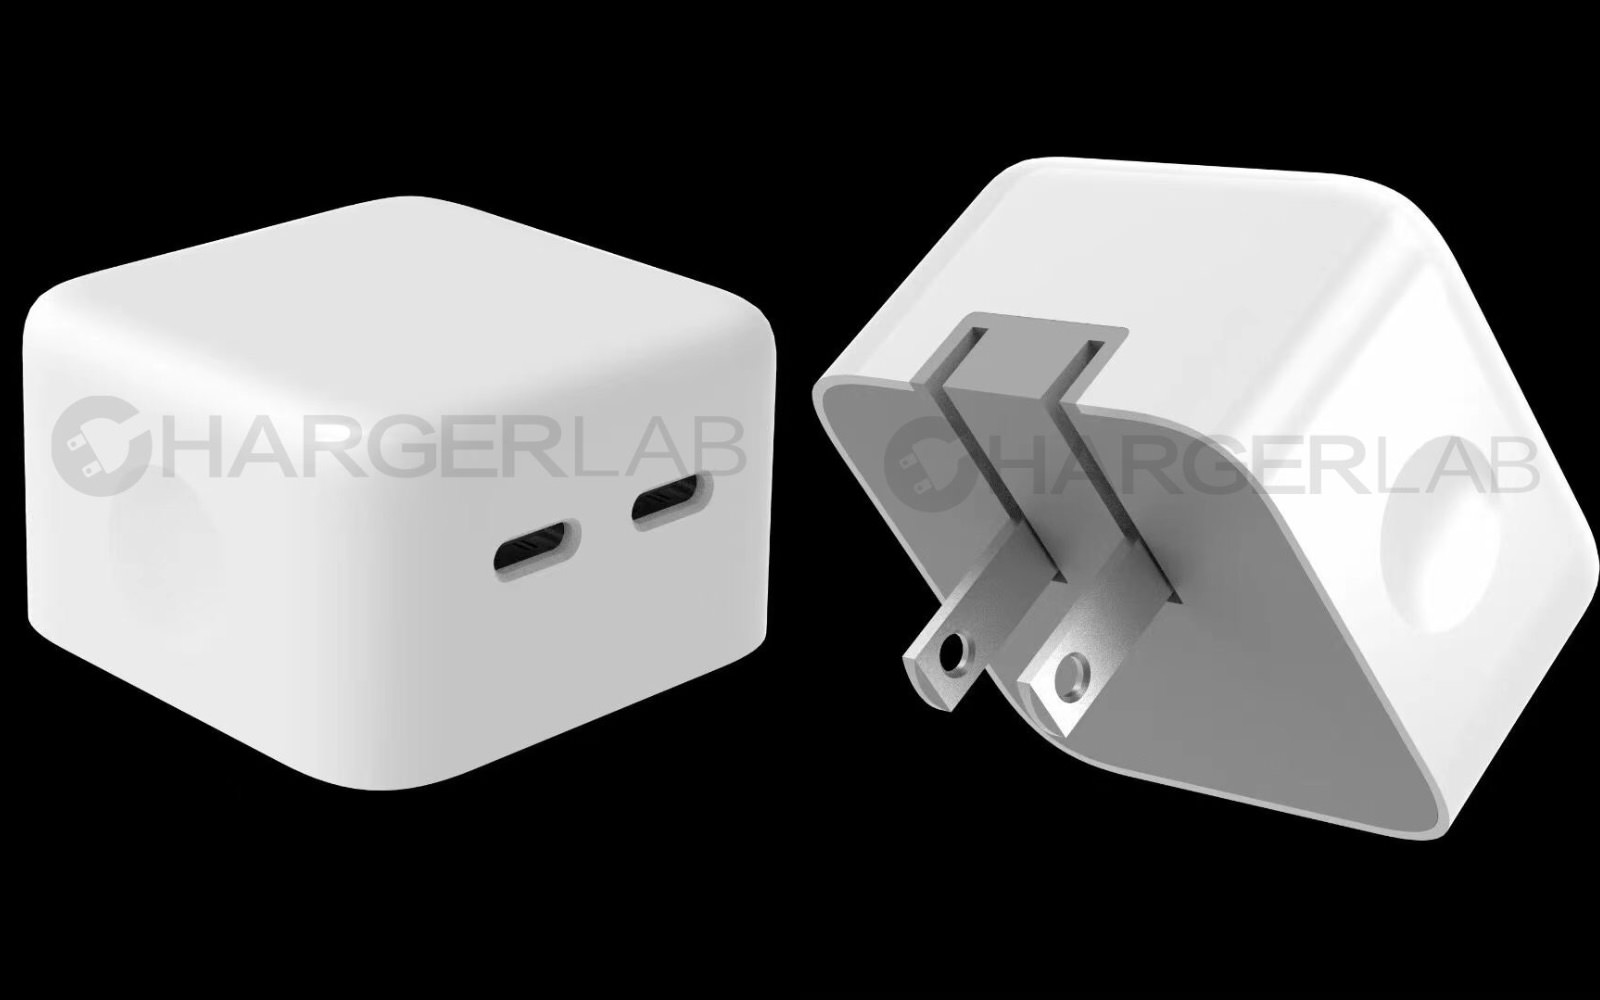 New Apple 35W charger Leaked images